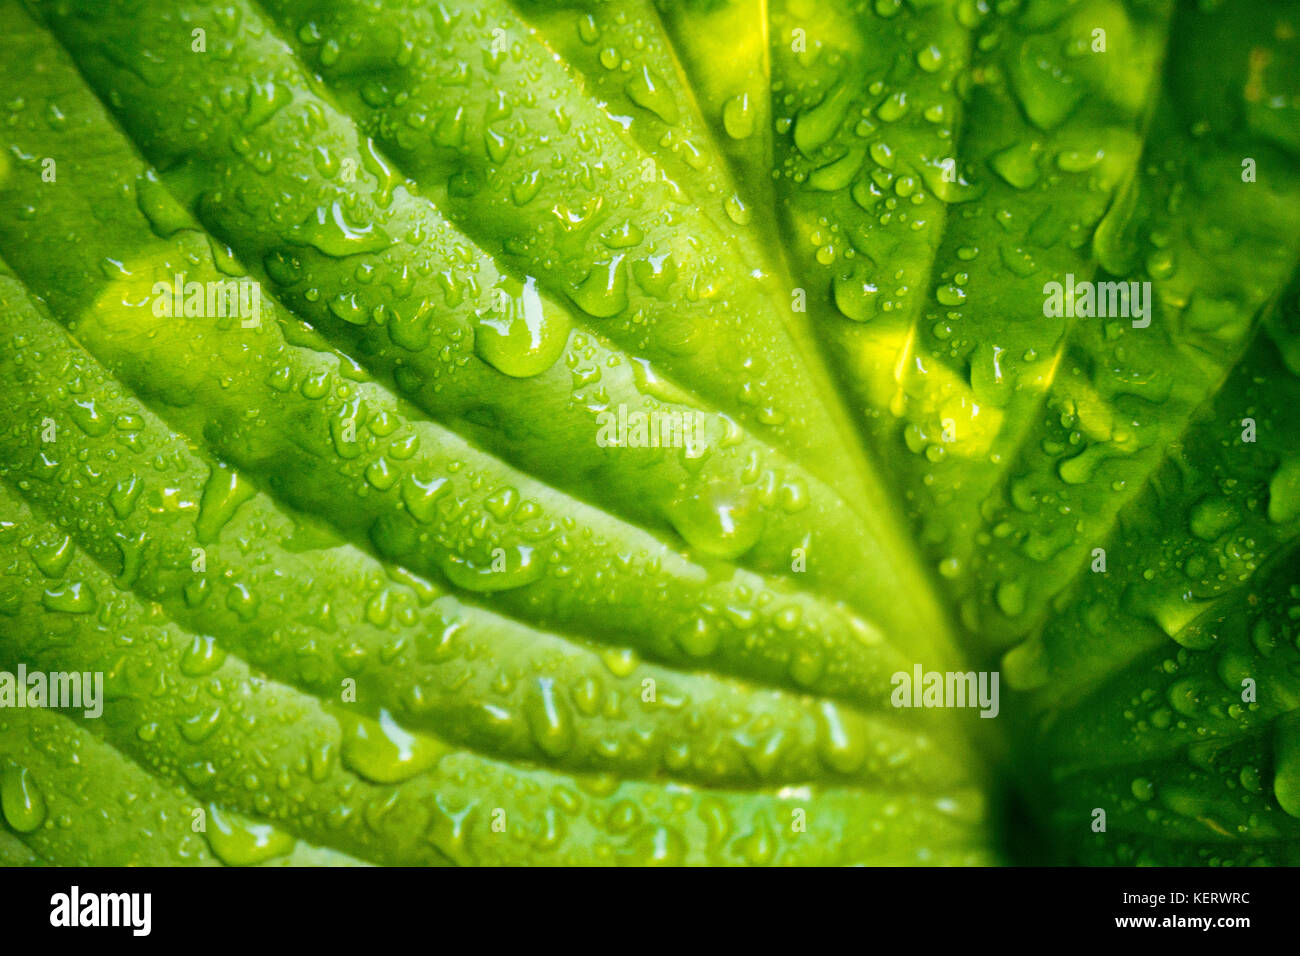 Close-Up of Green Hosta Plant Leaf with Morning Dew Stock Photo